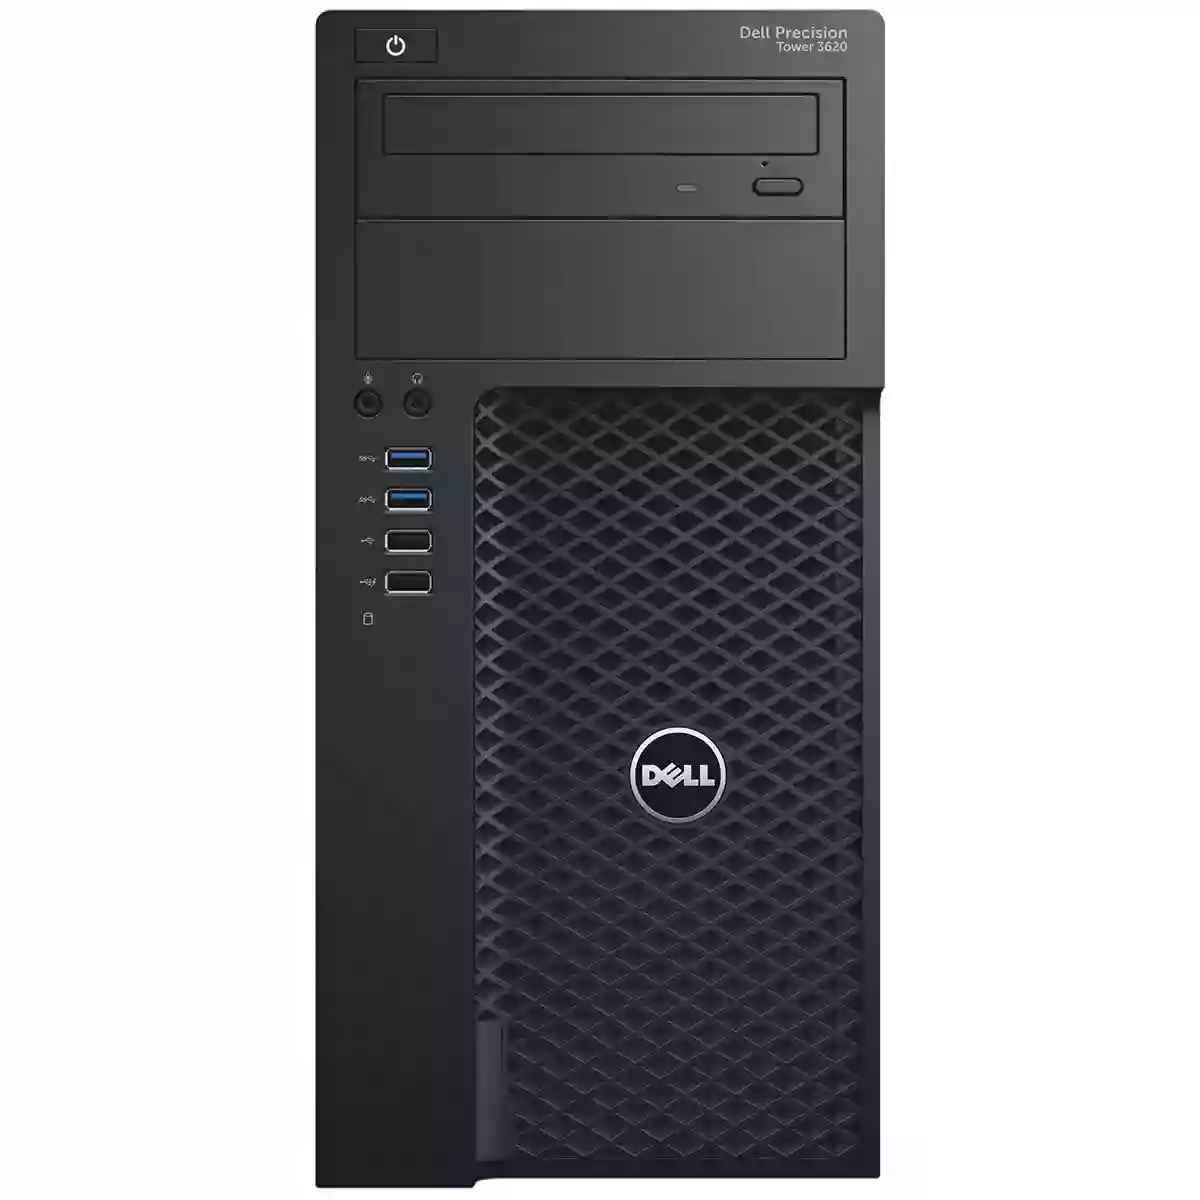 Dell Precision Workstation Tower 3620 16gb RAM 4ghz xeon 3TB HDD 400gb SSD Refurbished Computer with 3 free games